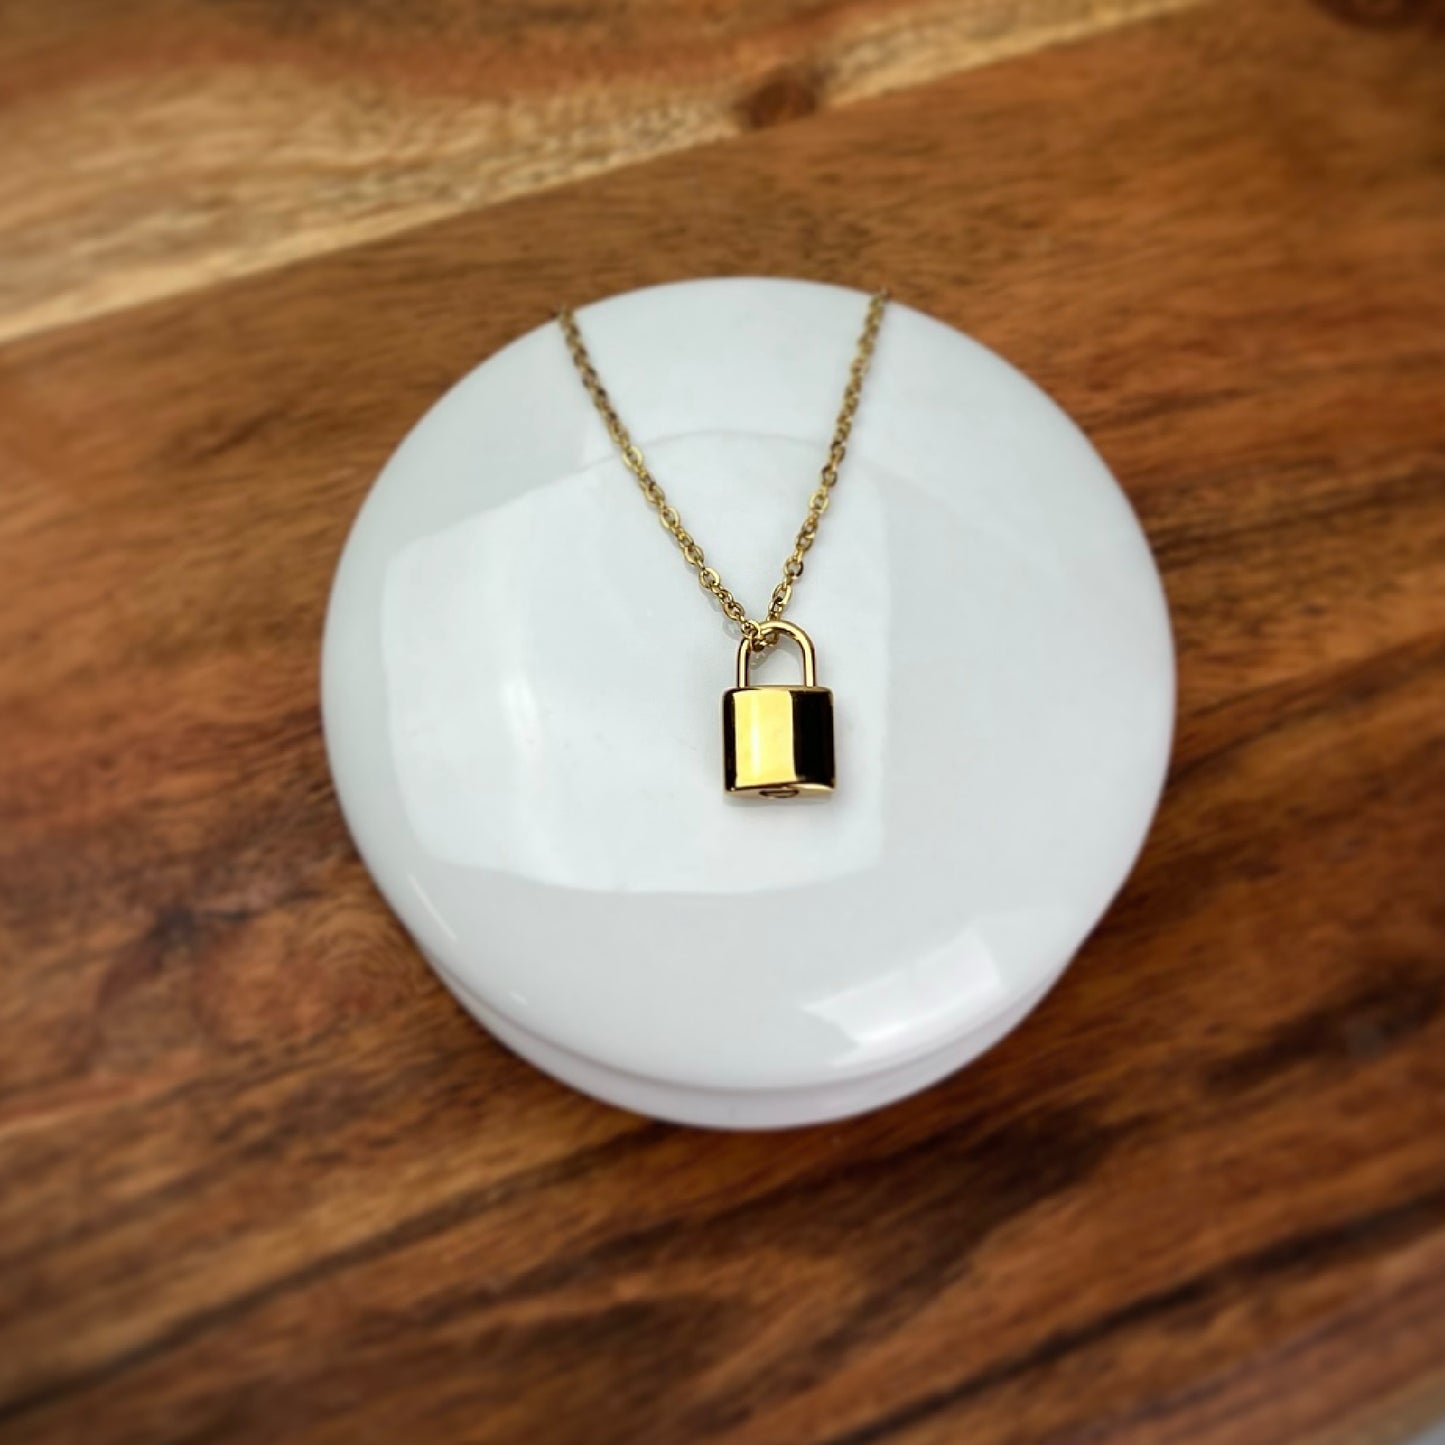 Cremation Necklace | Pet Urn Jewelry | Lock Pendant Urn Necklace